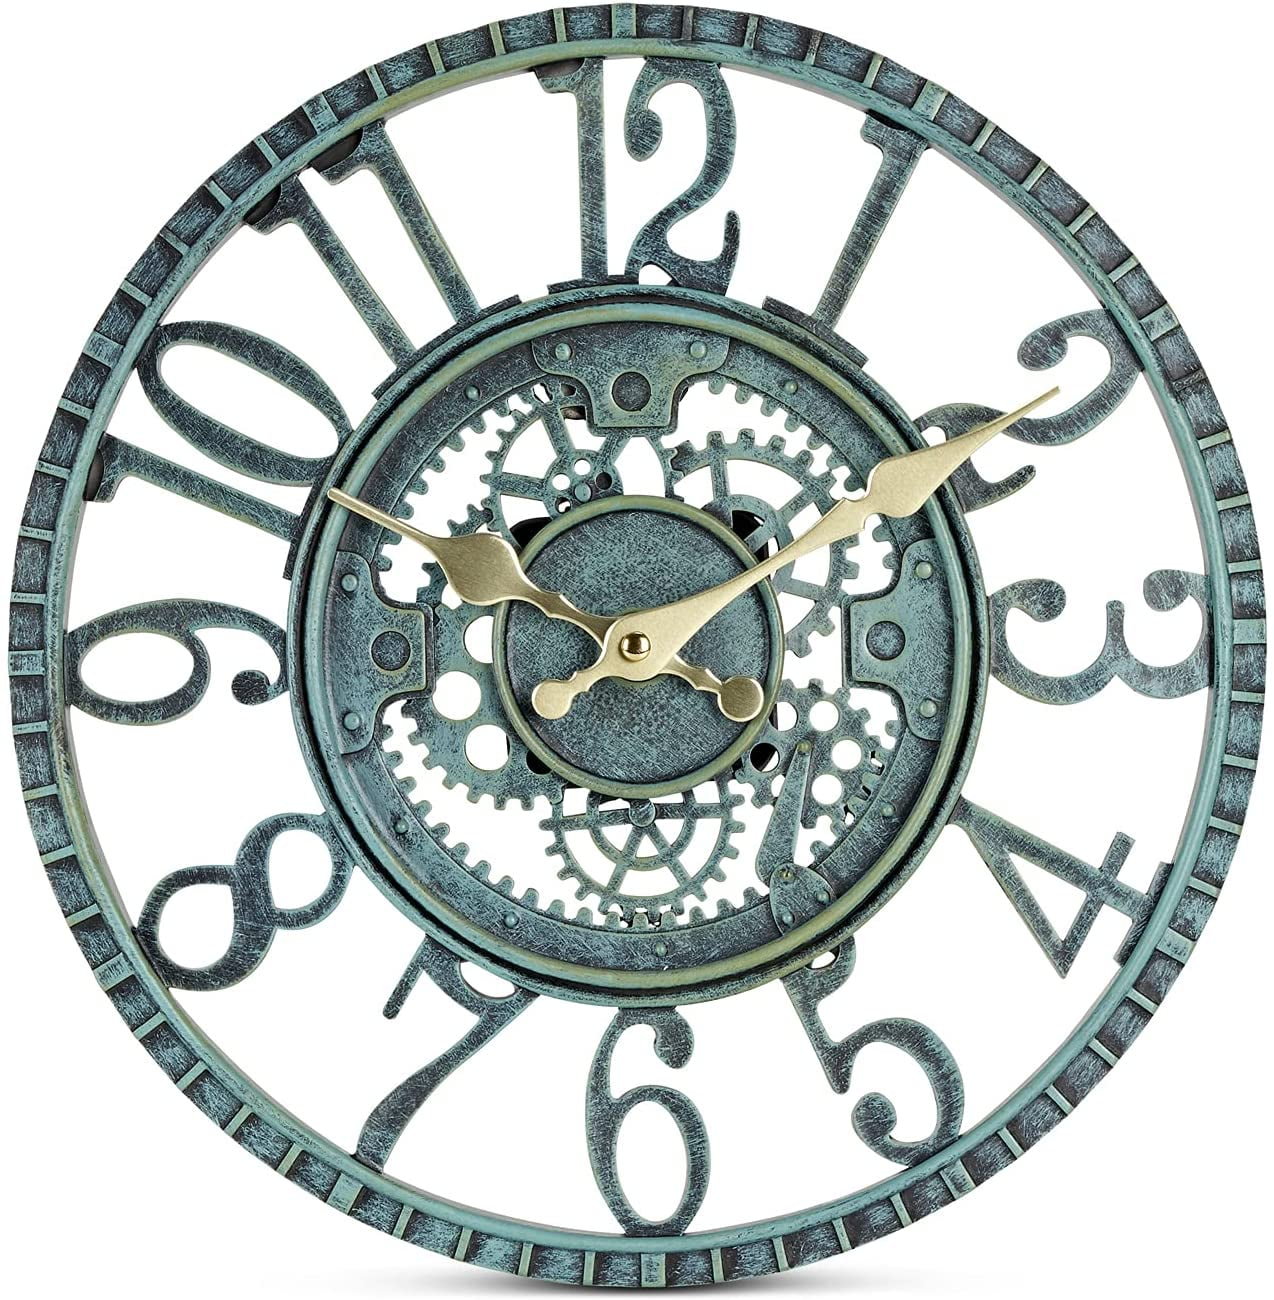 GARDEN WALL CLOCK SKELETON LARGE KITCHEN OUTDOOR ORNAMENT GIANT OPEN FACE METAL 